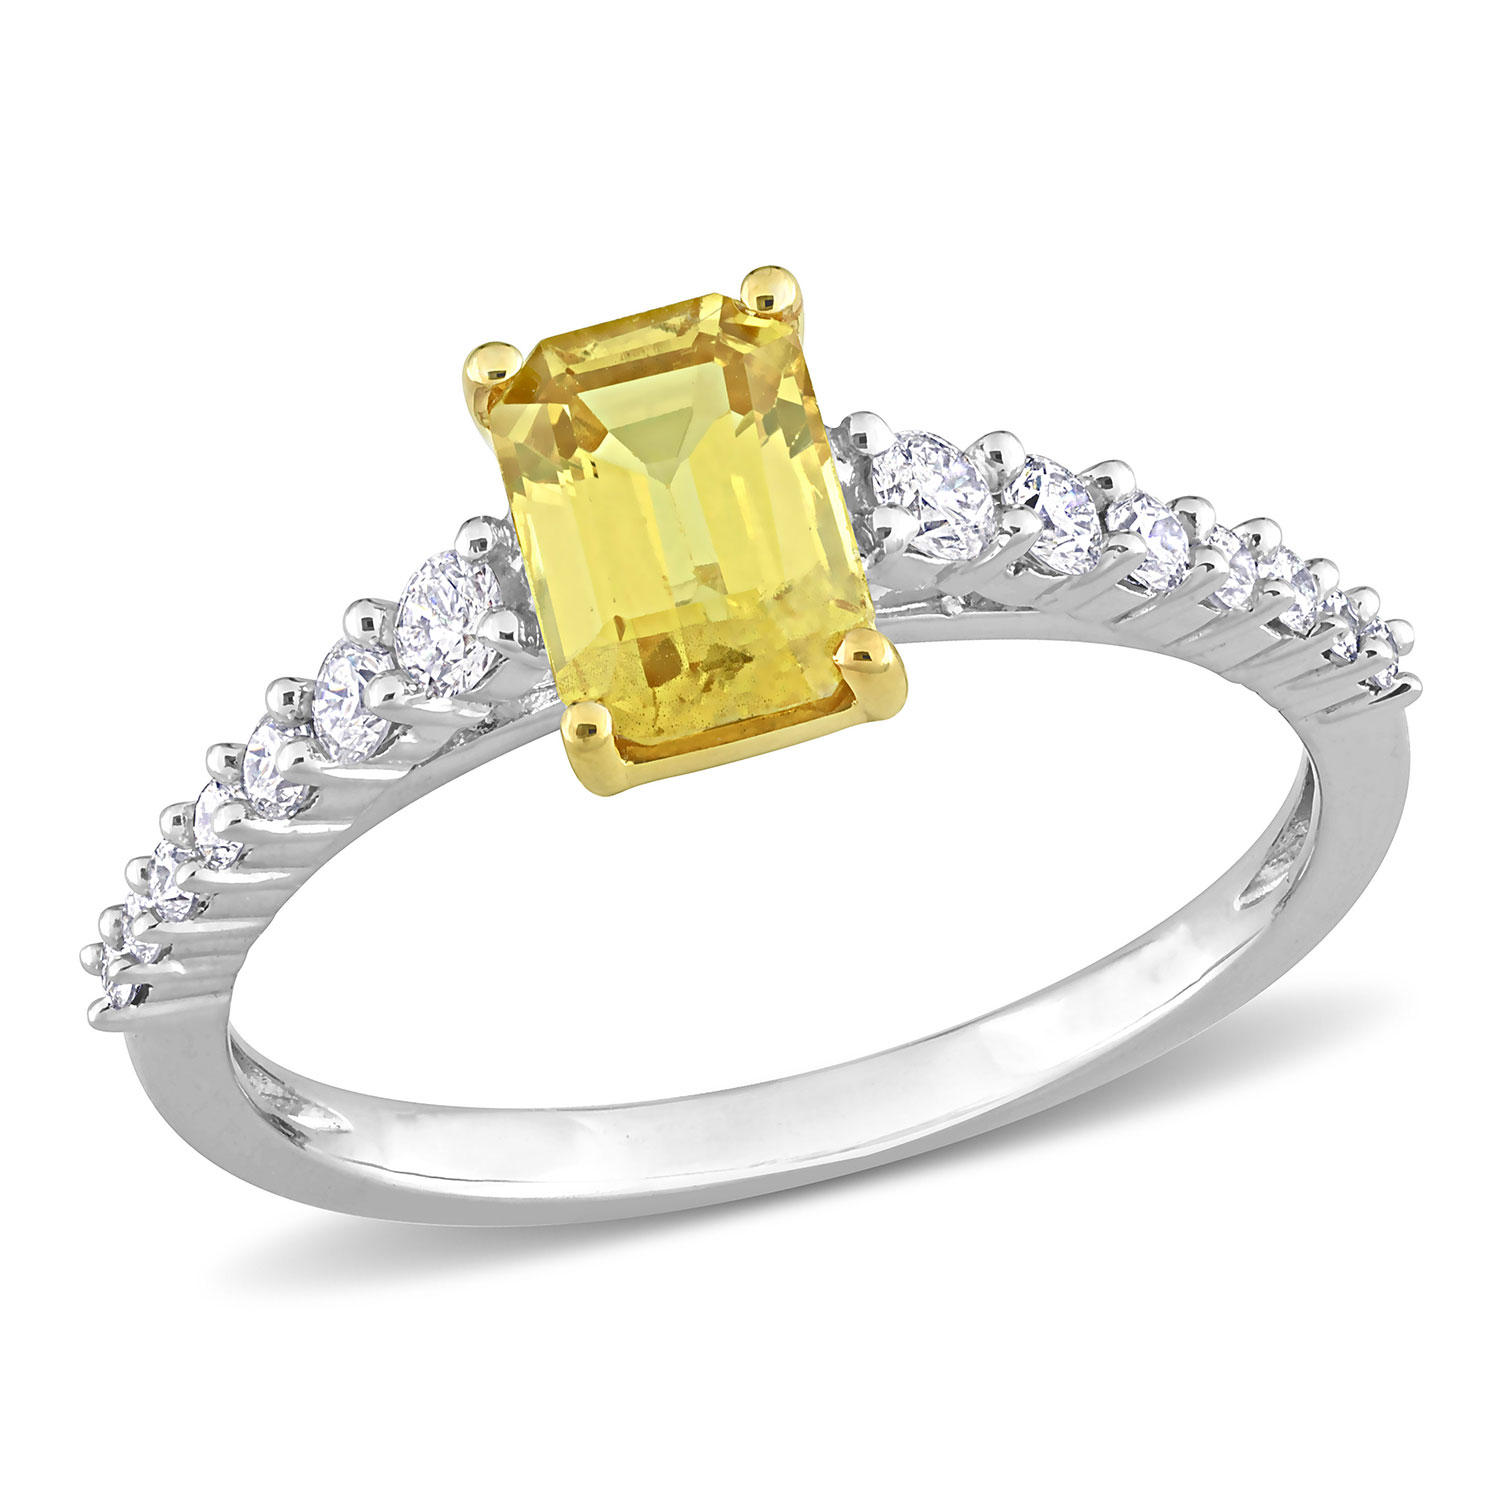 Emerald-Cut Yellow Sapphire and 0.3 CT. T.W. Diamond Engagement Ring in 14K White Gold, 7